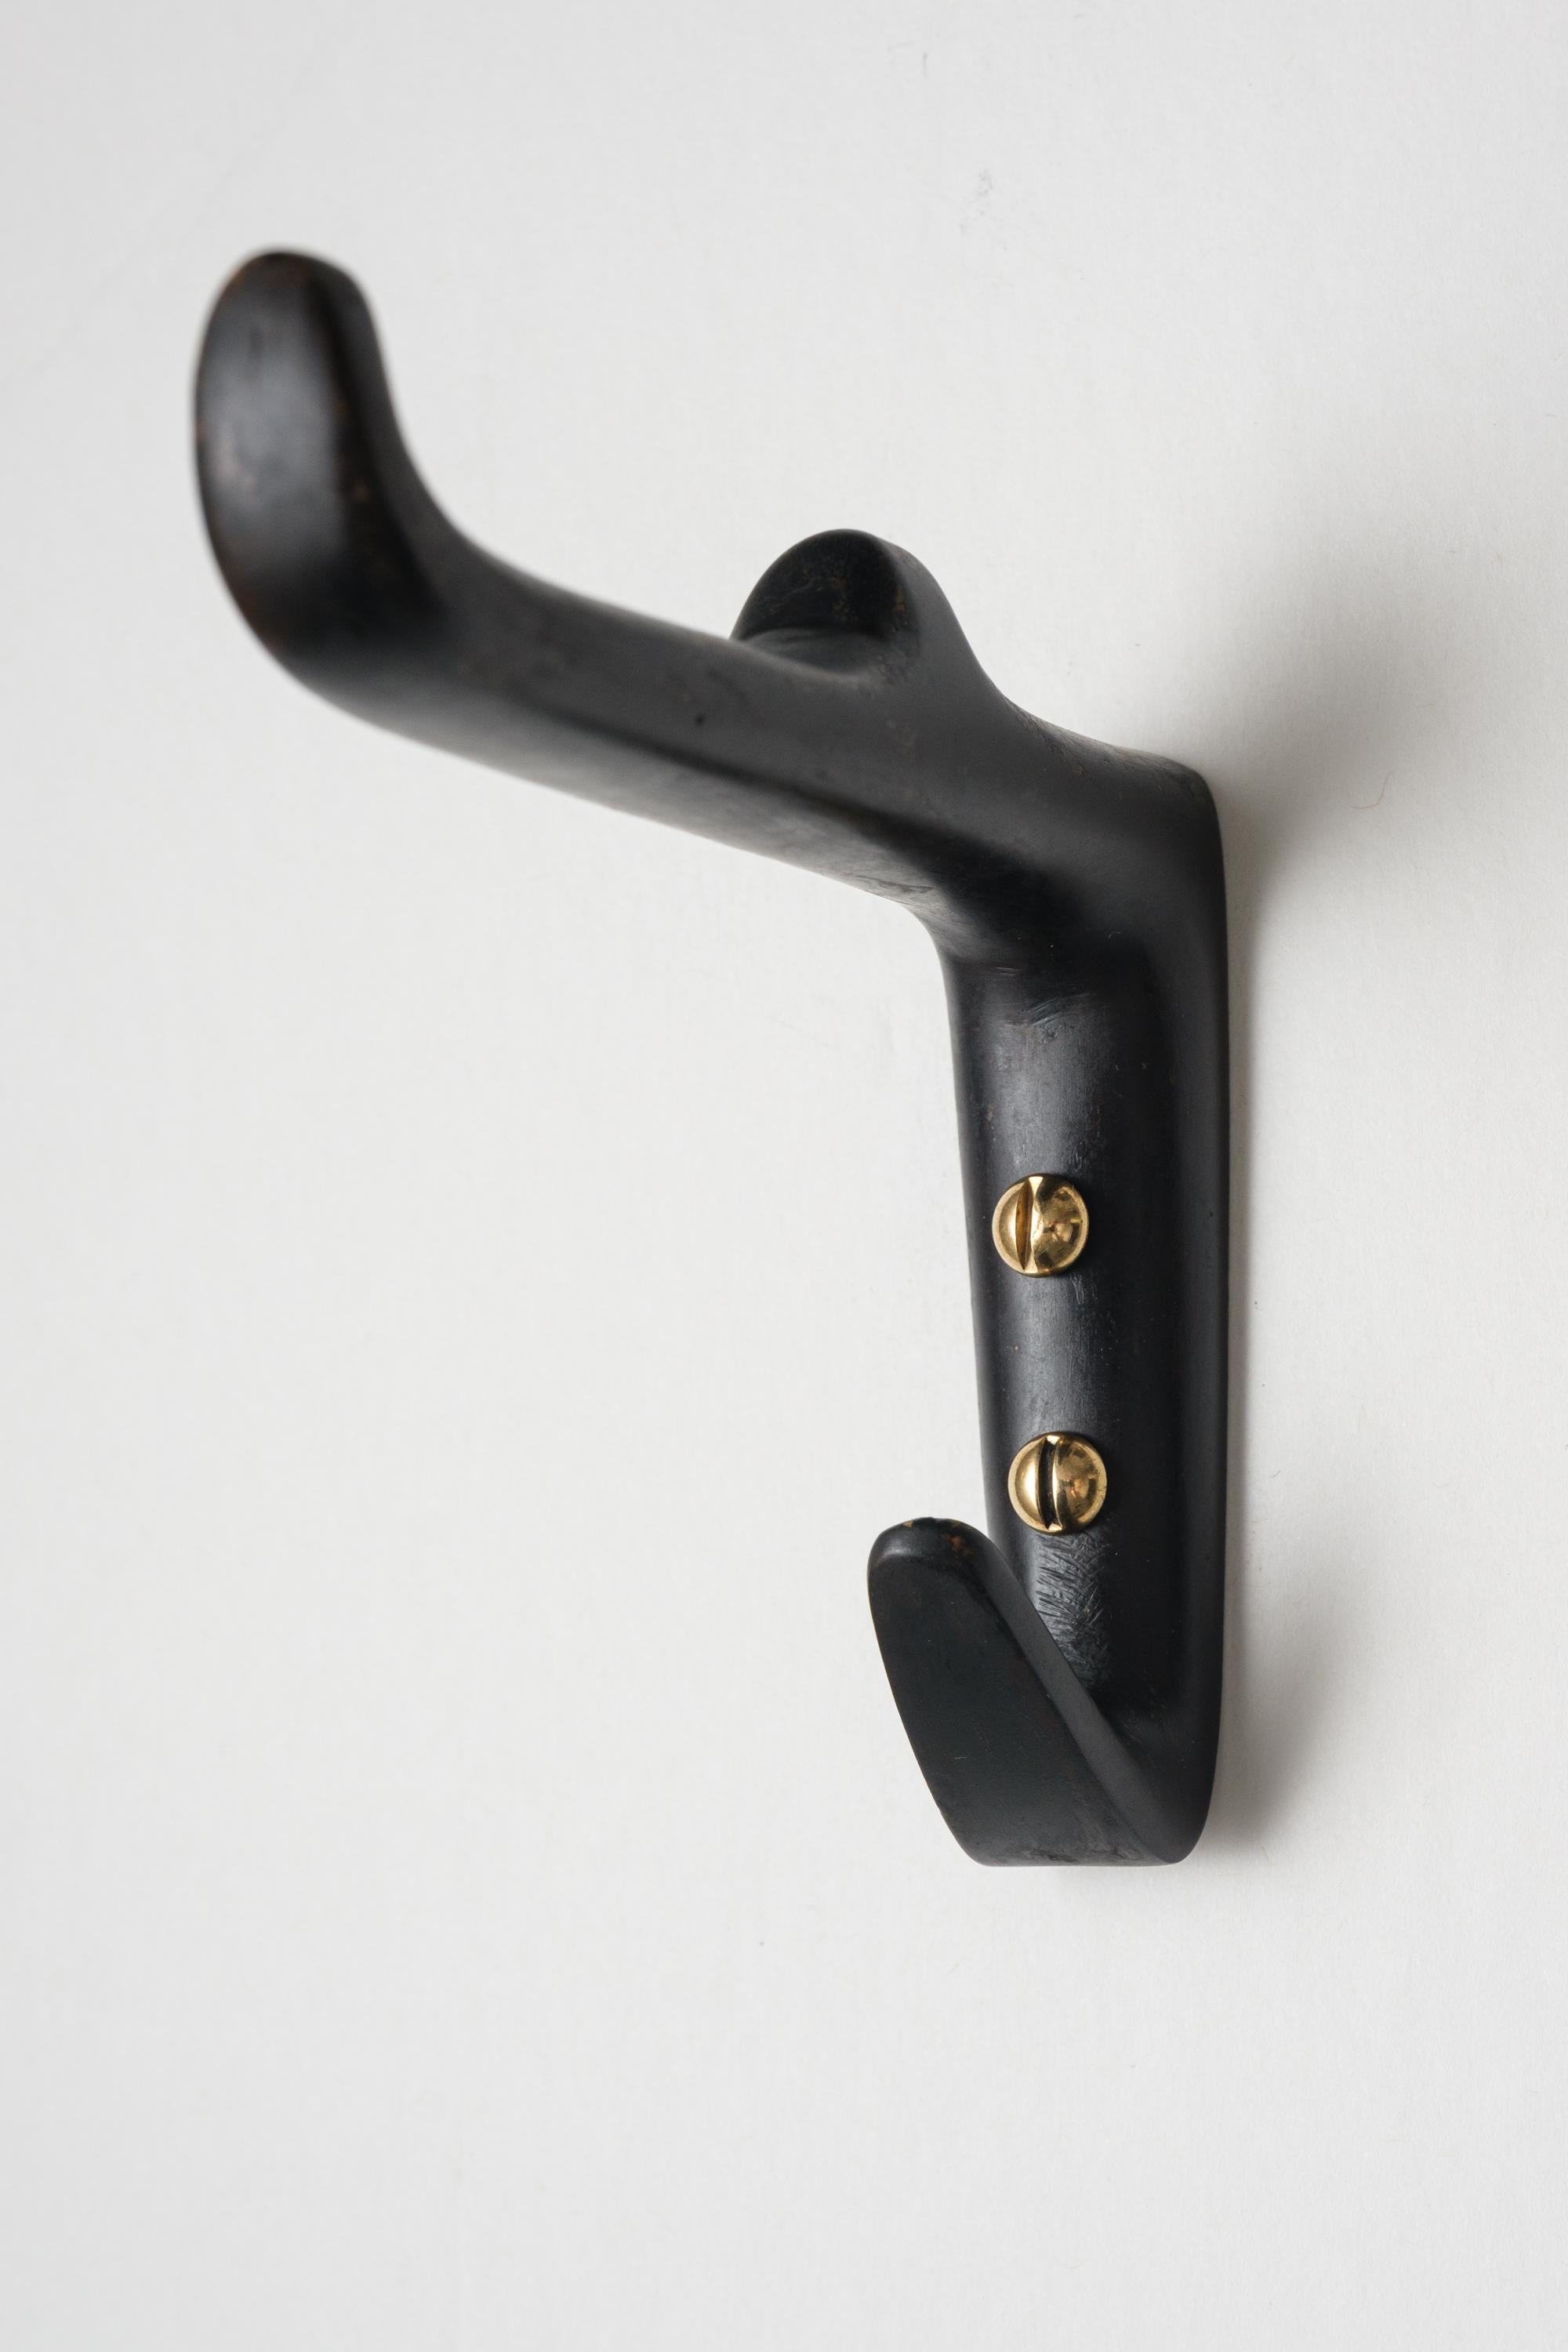 Carl Auböck #4965 patinated brass hook. Designed in the 1950s, this versatile and Minimalist Viennese hook is executed in darkly patinated and polished brass by Werkstätte Carl Auböck, Austria.

Produced by Carl Auböck IV in the original Auböck